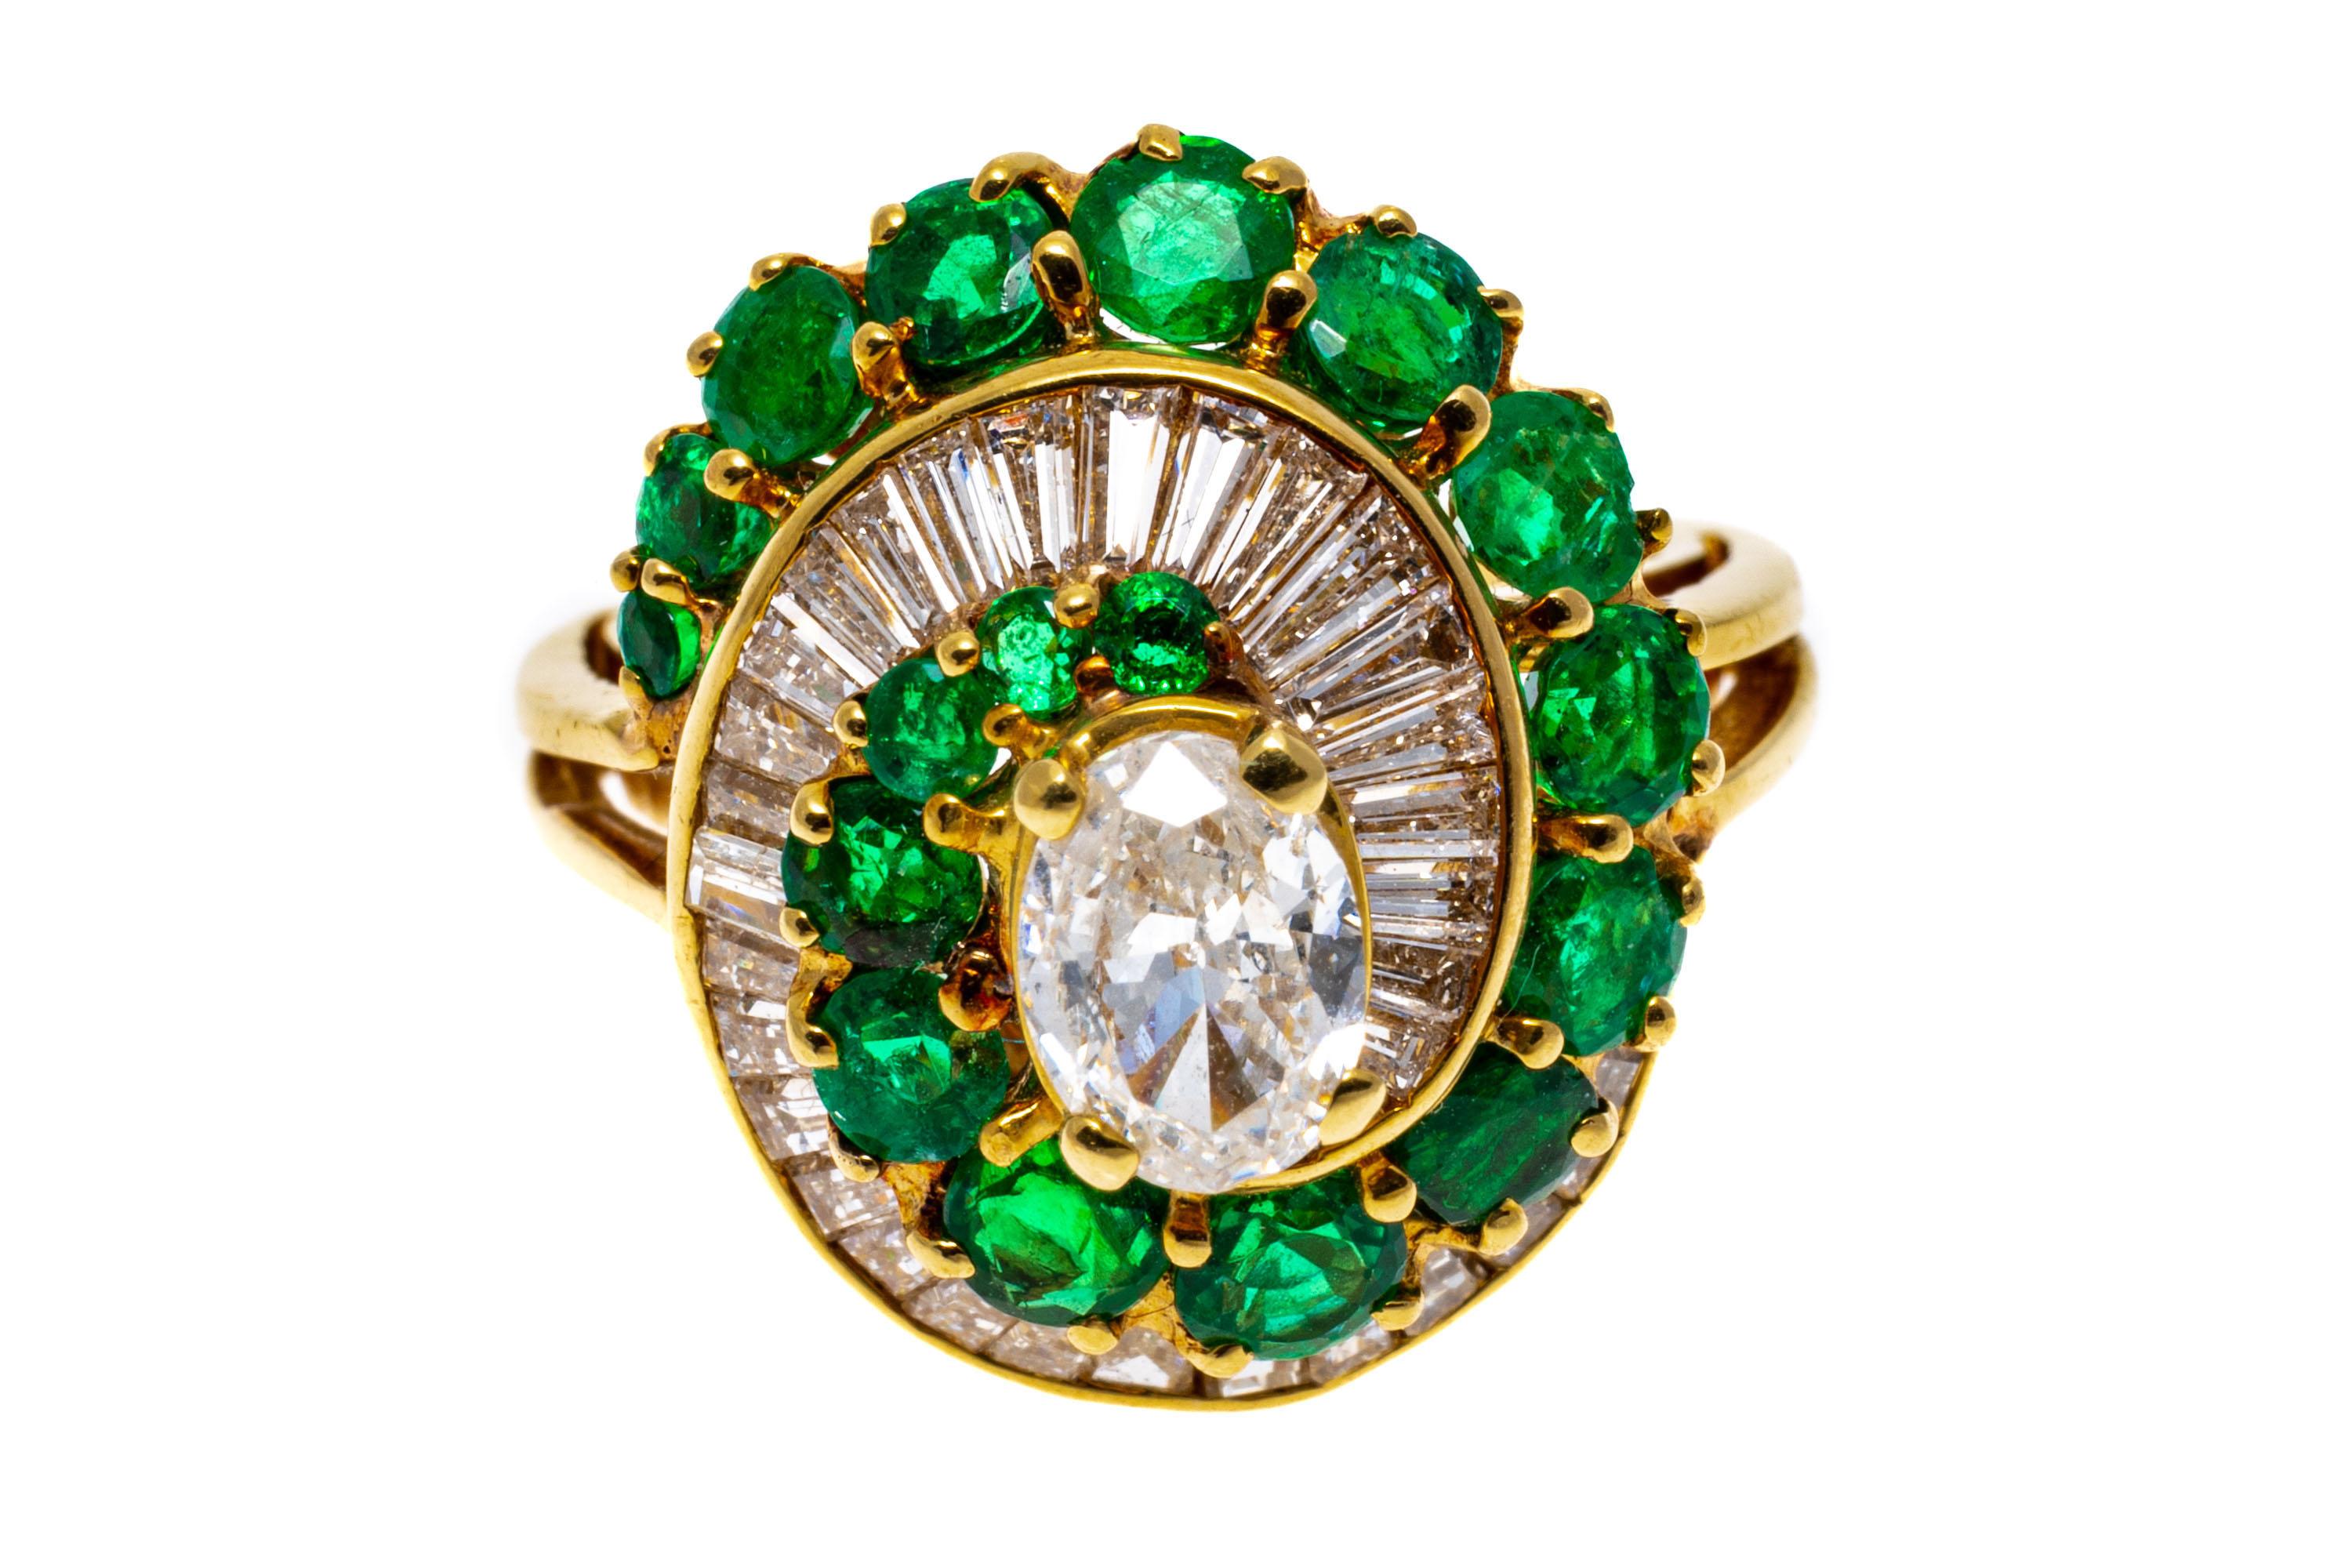 14k yellow gold ring. This amazing ring is a spiral of graduated, round faceted, bright green color emeralds, approximately 1.18 TCW, prong set, and alternating with a row of graduated baguette cut diamonds, channel set, approximately 0.56 TCW. Set